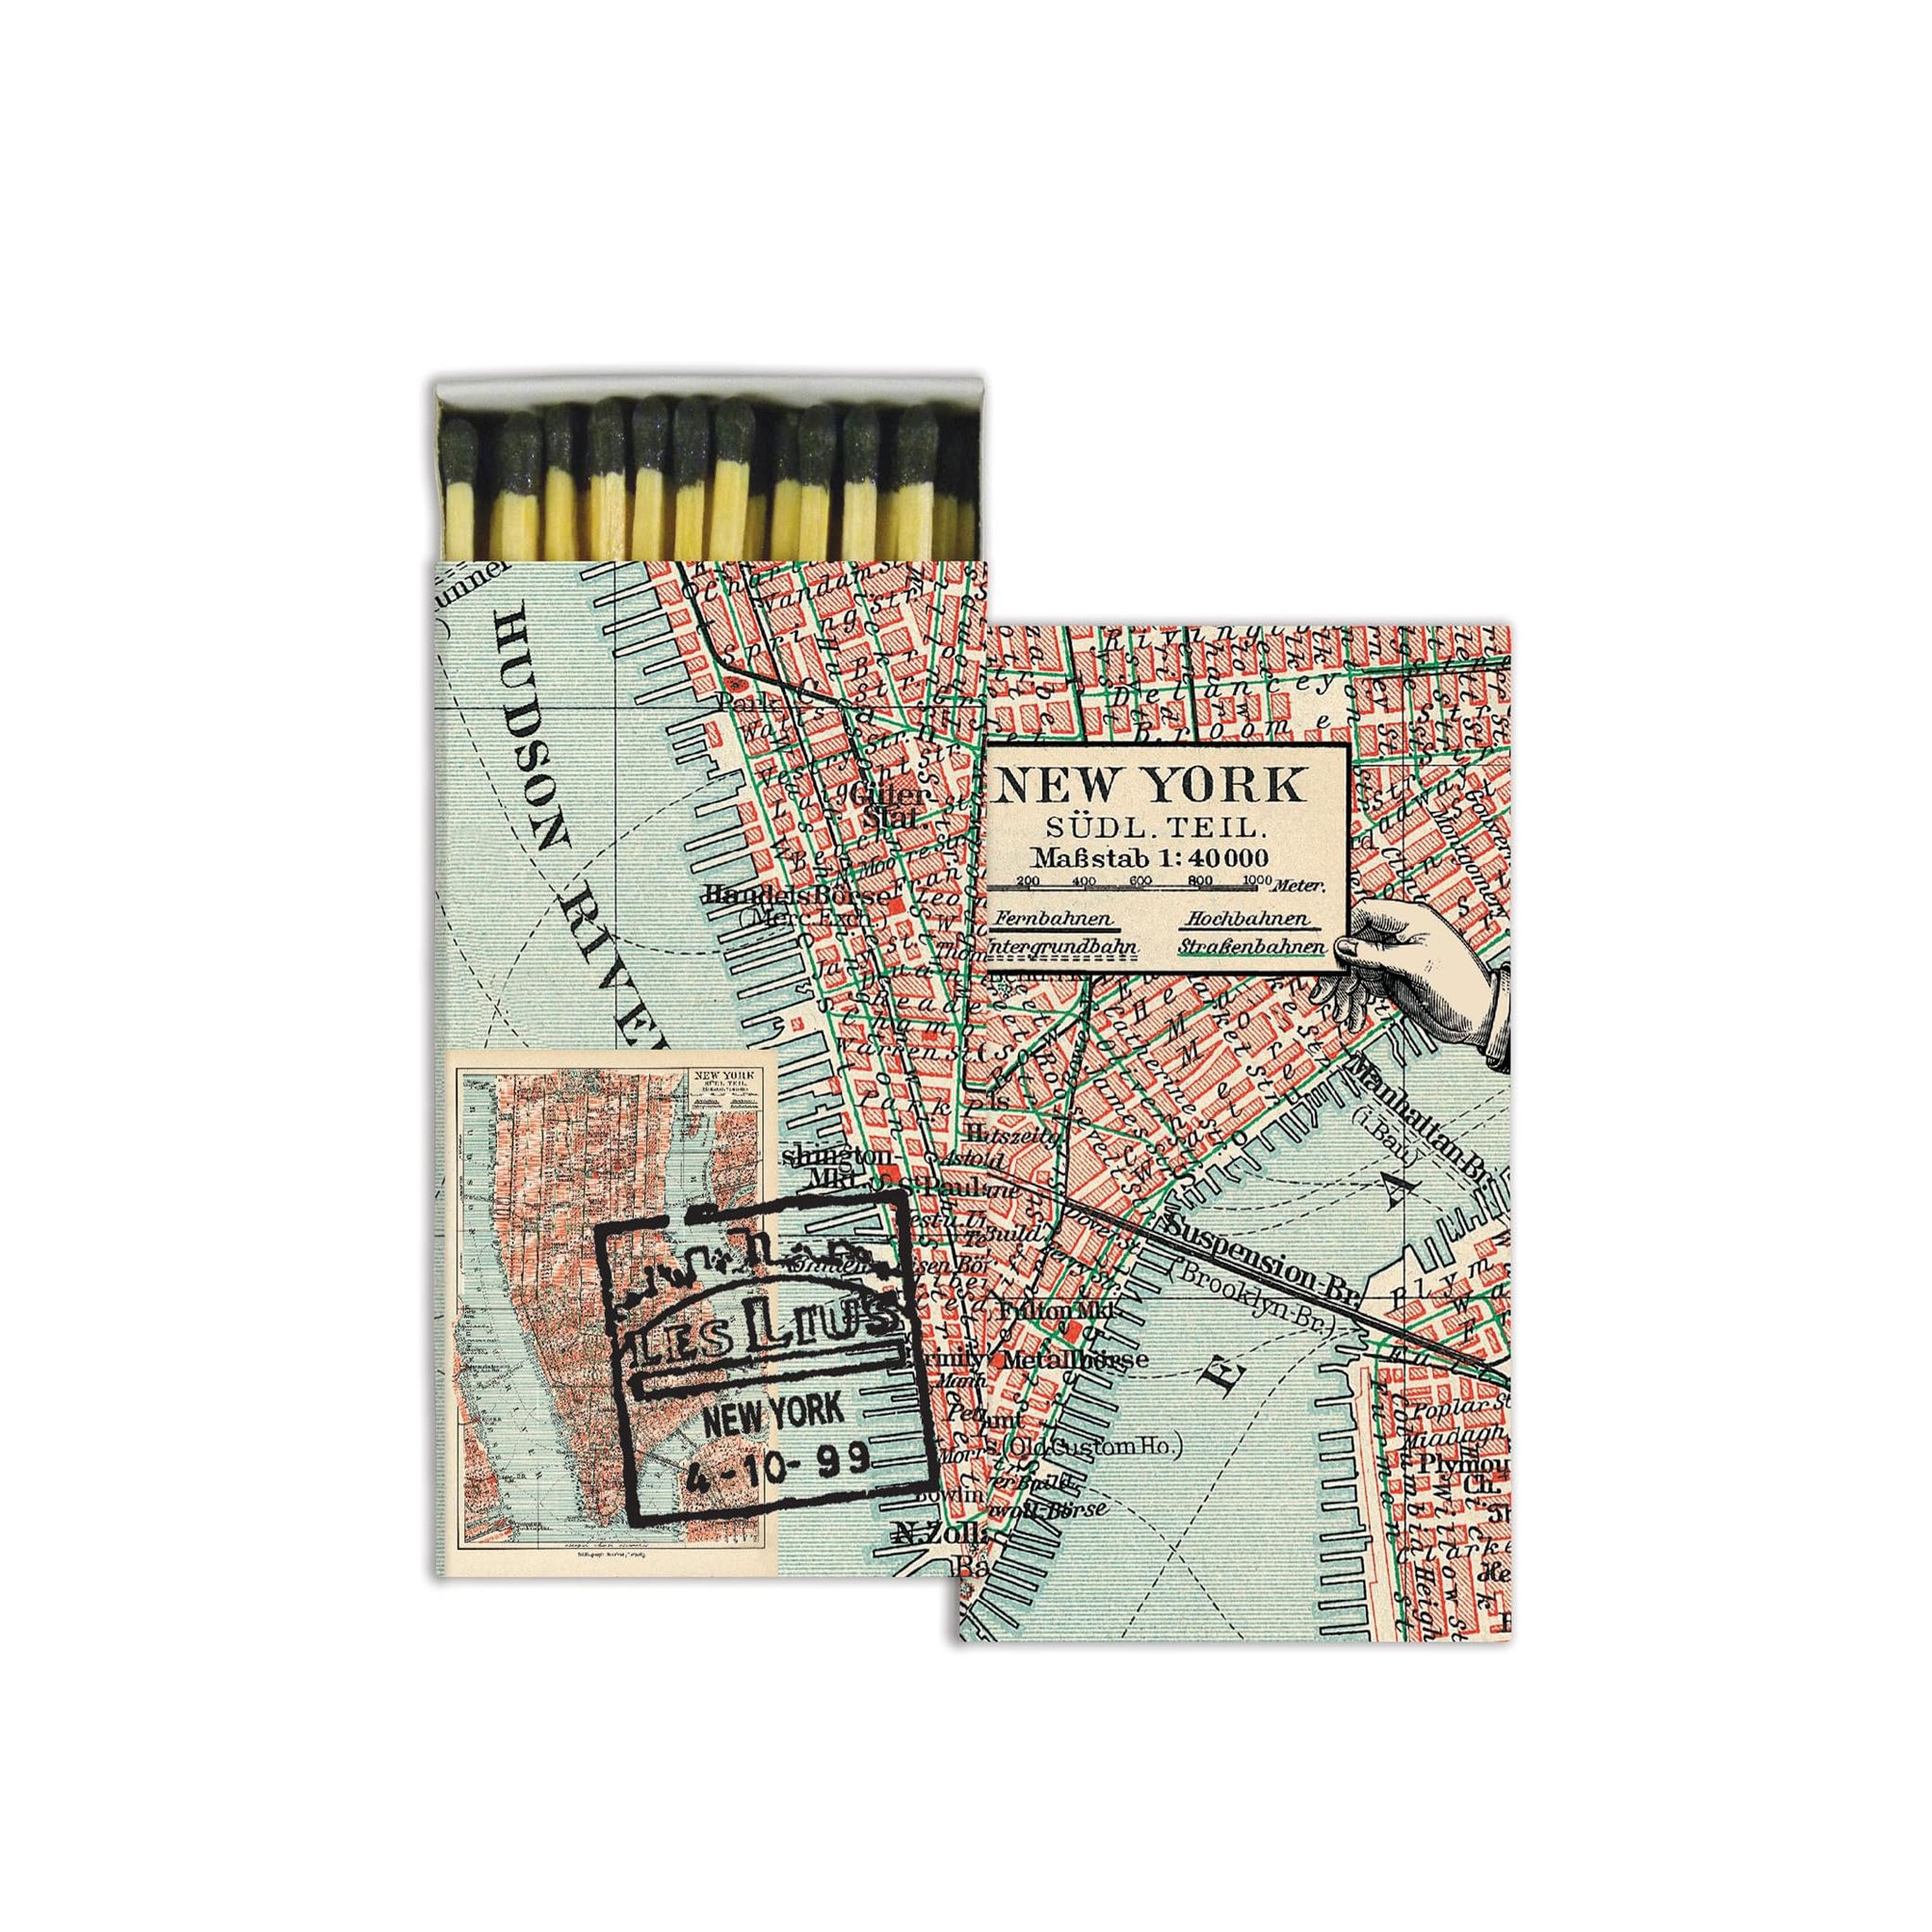 Matches with Vintage New York Map printed on Matchbox